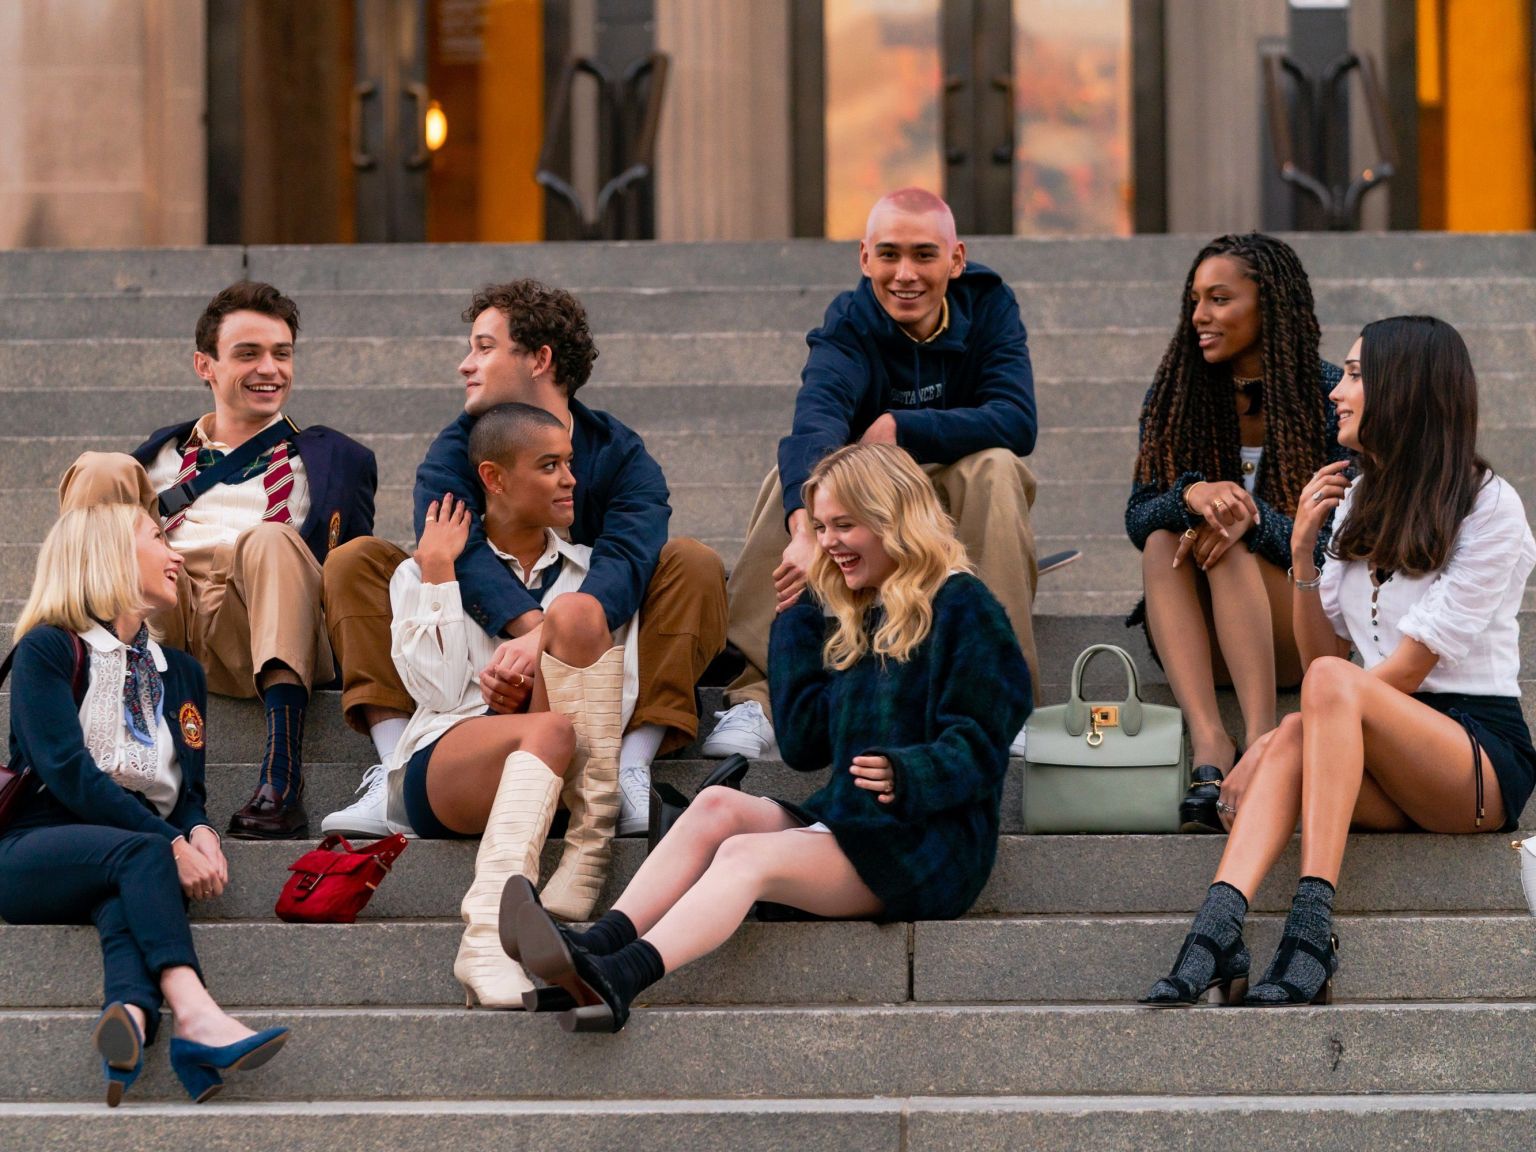 Hbo Max Reveals Glimpse Of Gossip Girl Reboot Tv Trailer Conversations About Her